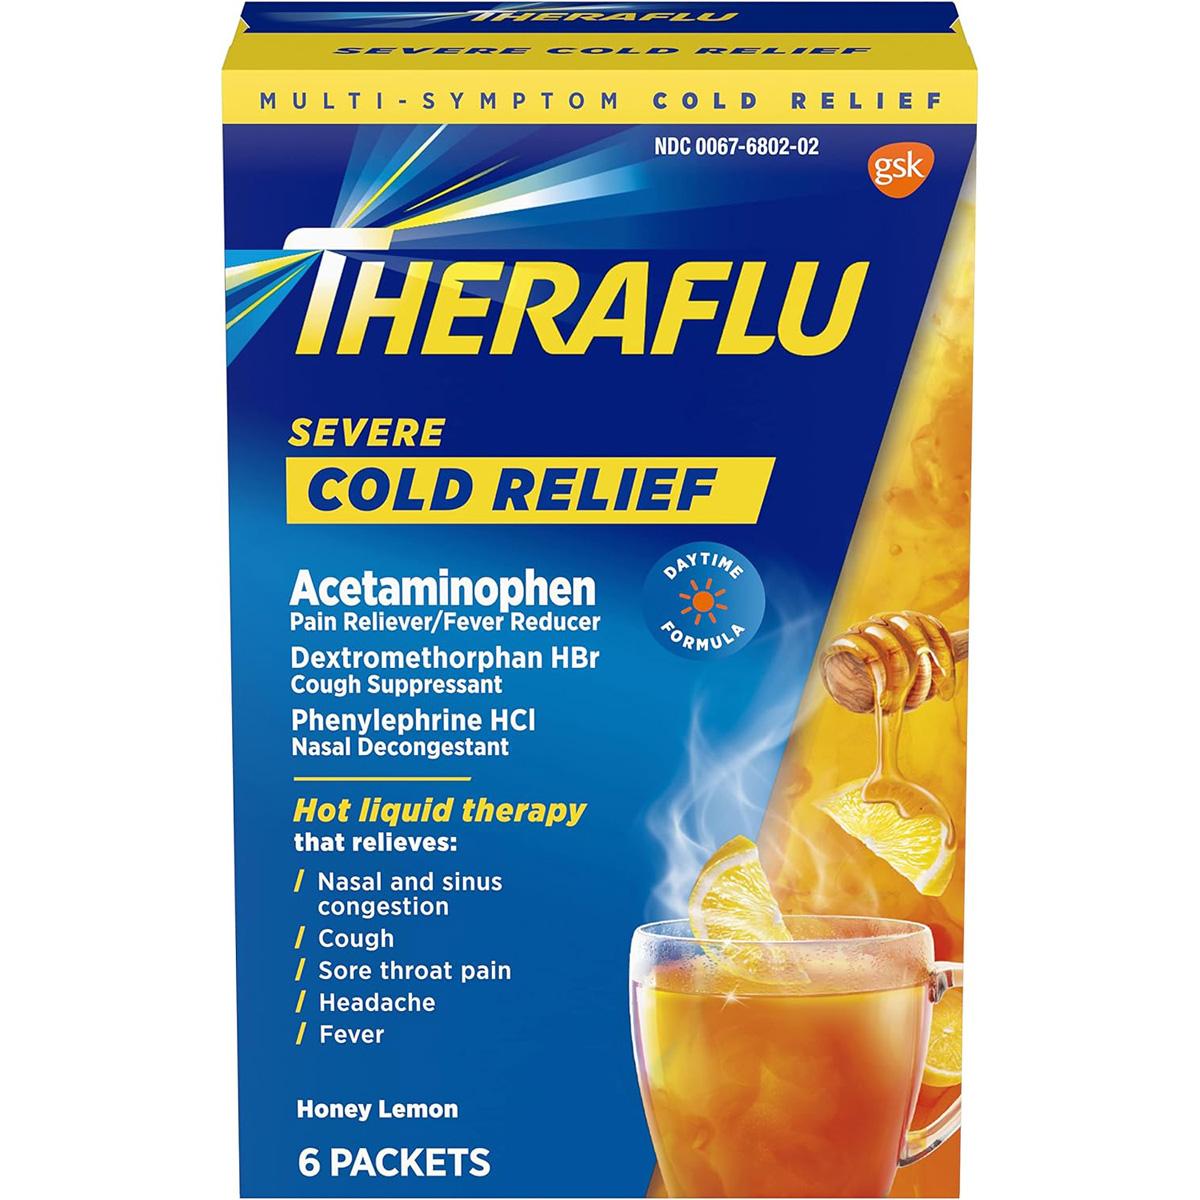 Theraflu Daytime Severe Cold Relief Powder 6 Pack for $4.37